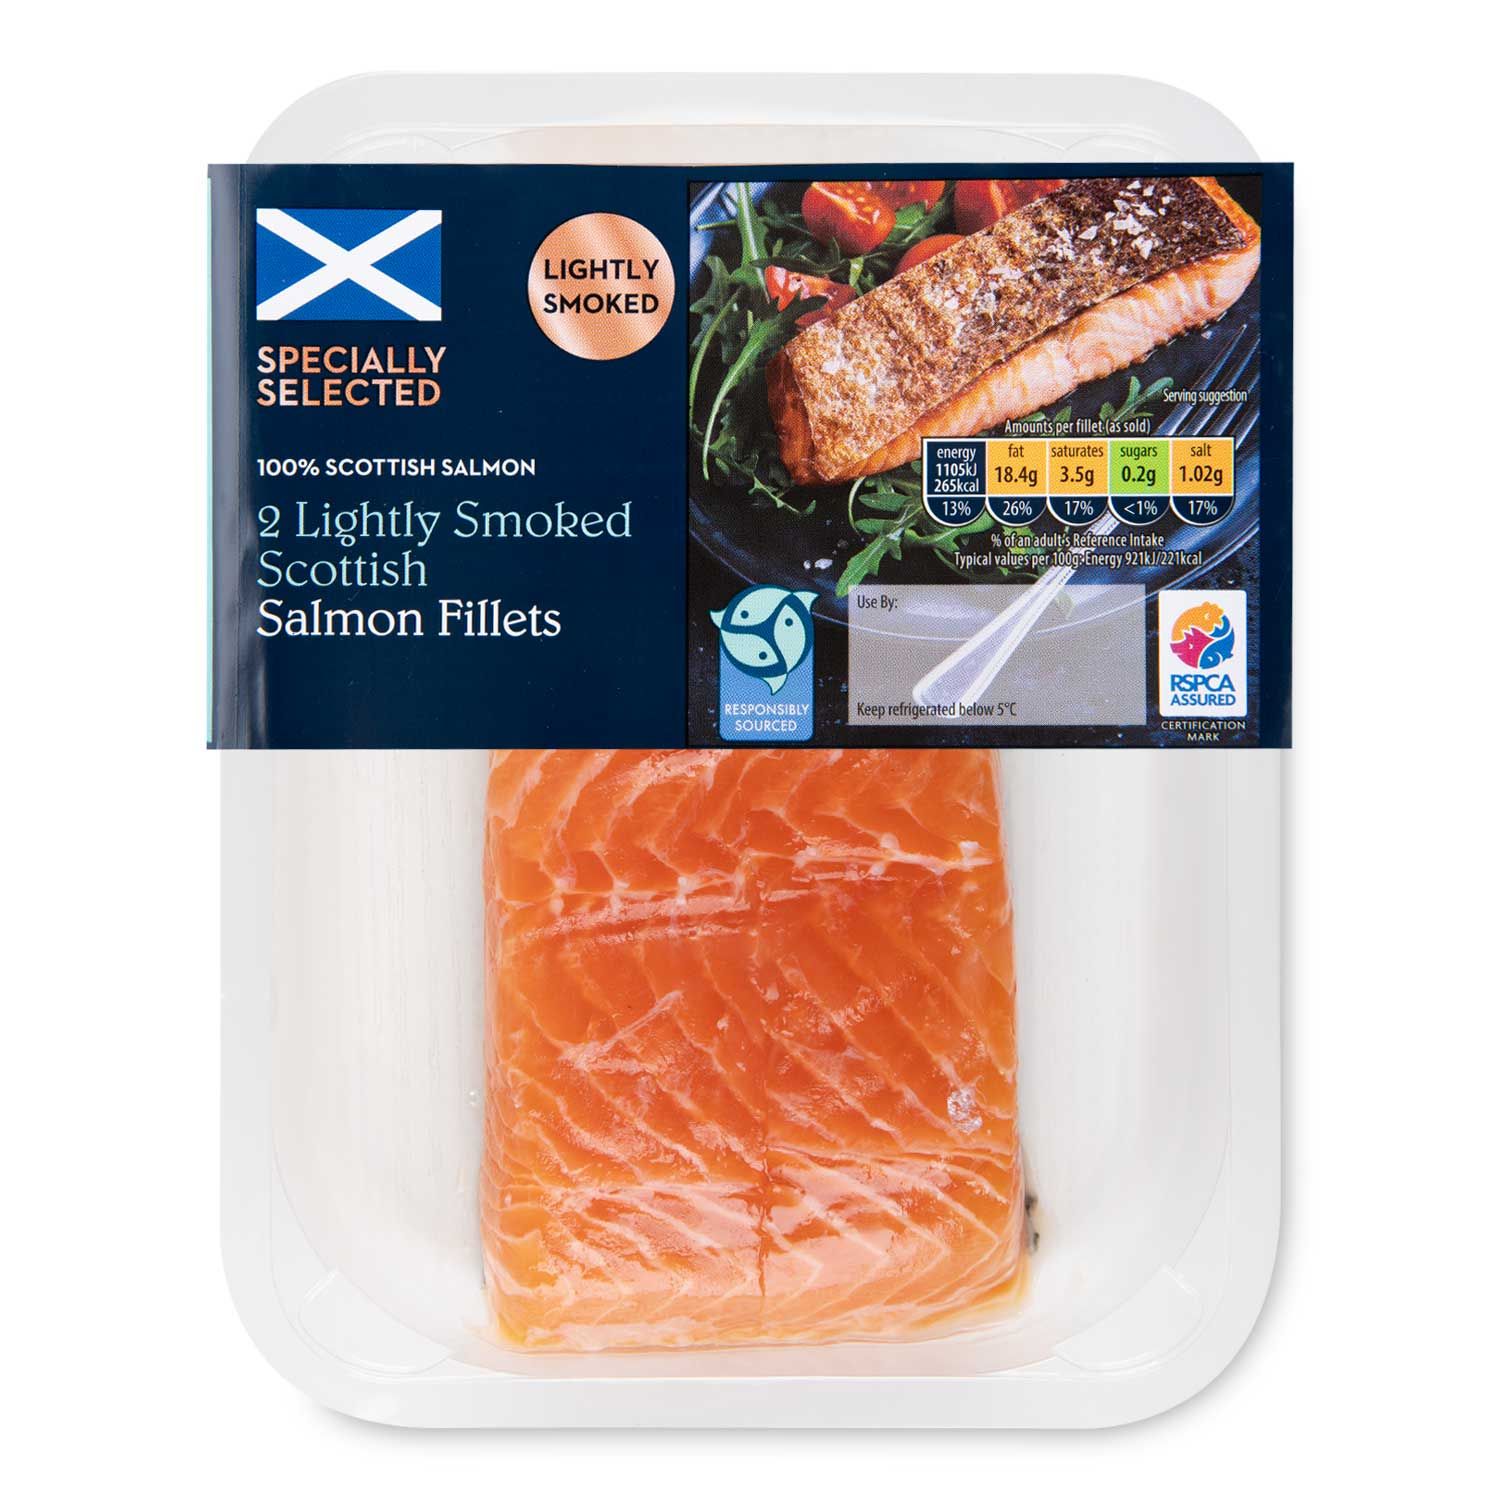 Specially Selected Lightly Smoked Scottish Salmon Fillets 240g/2 Pack